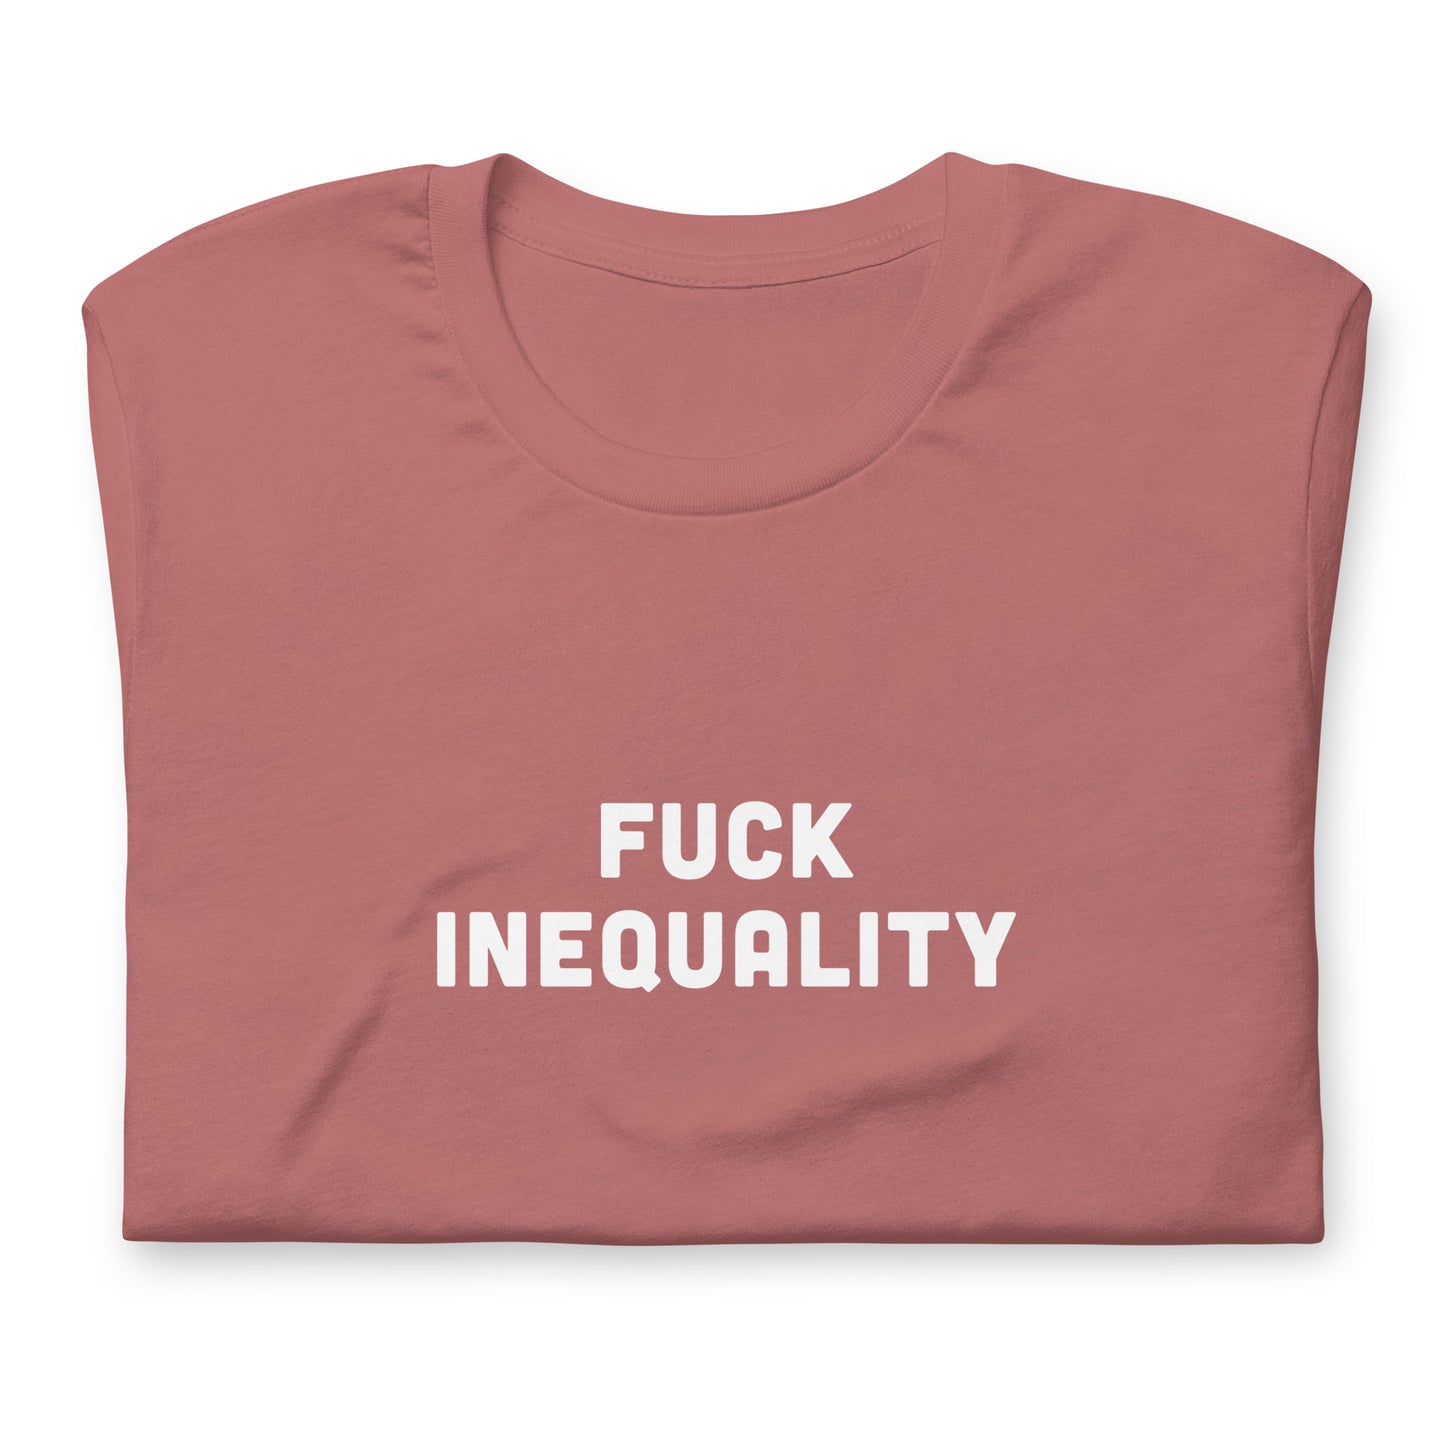 Fuck Inequality T-Shirt Size S Color Black